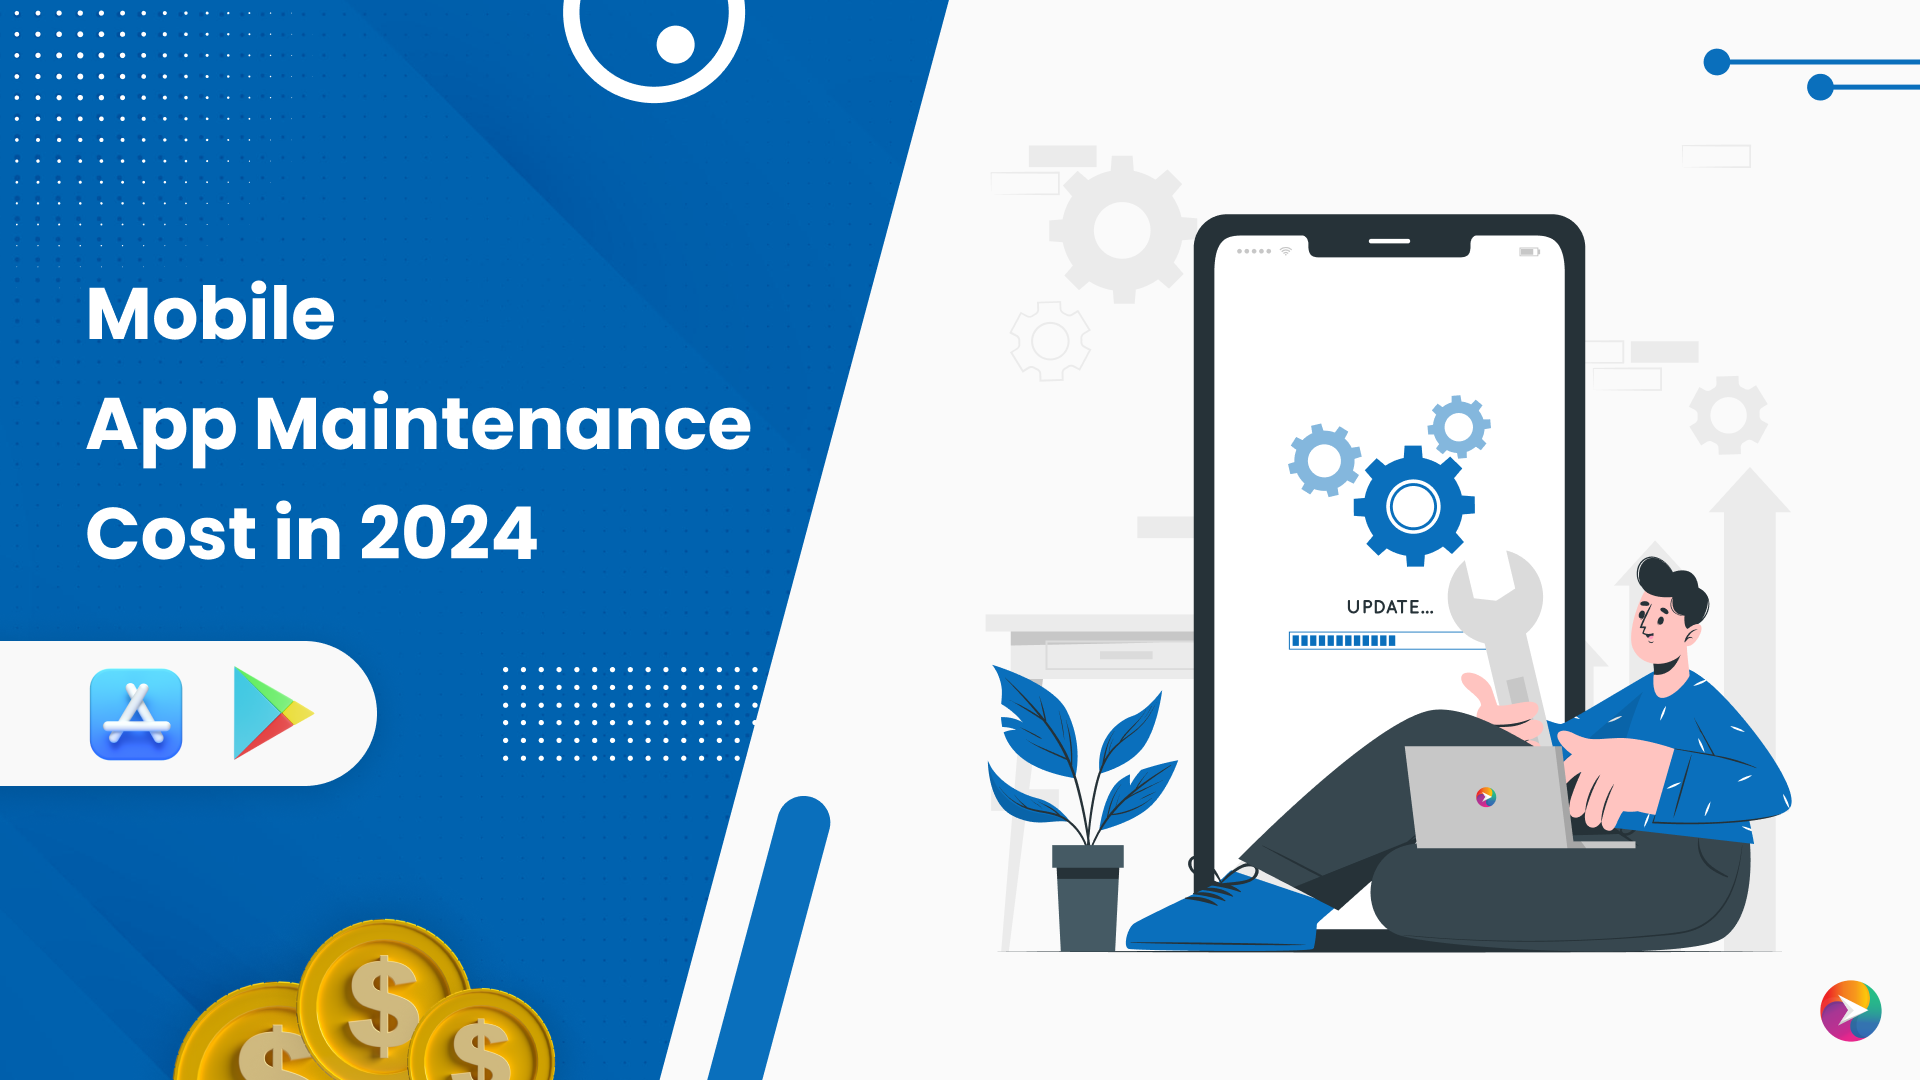 Mobile App Maintenance Cost in 2024